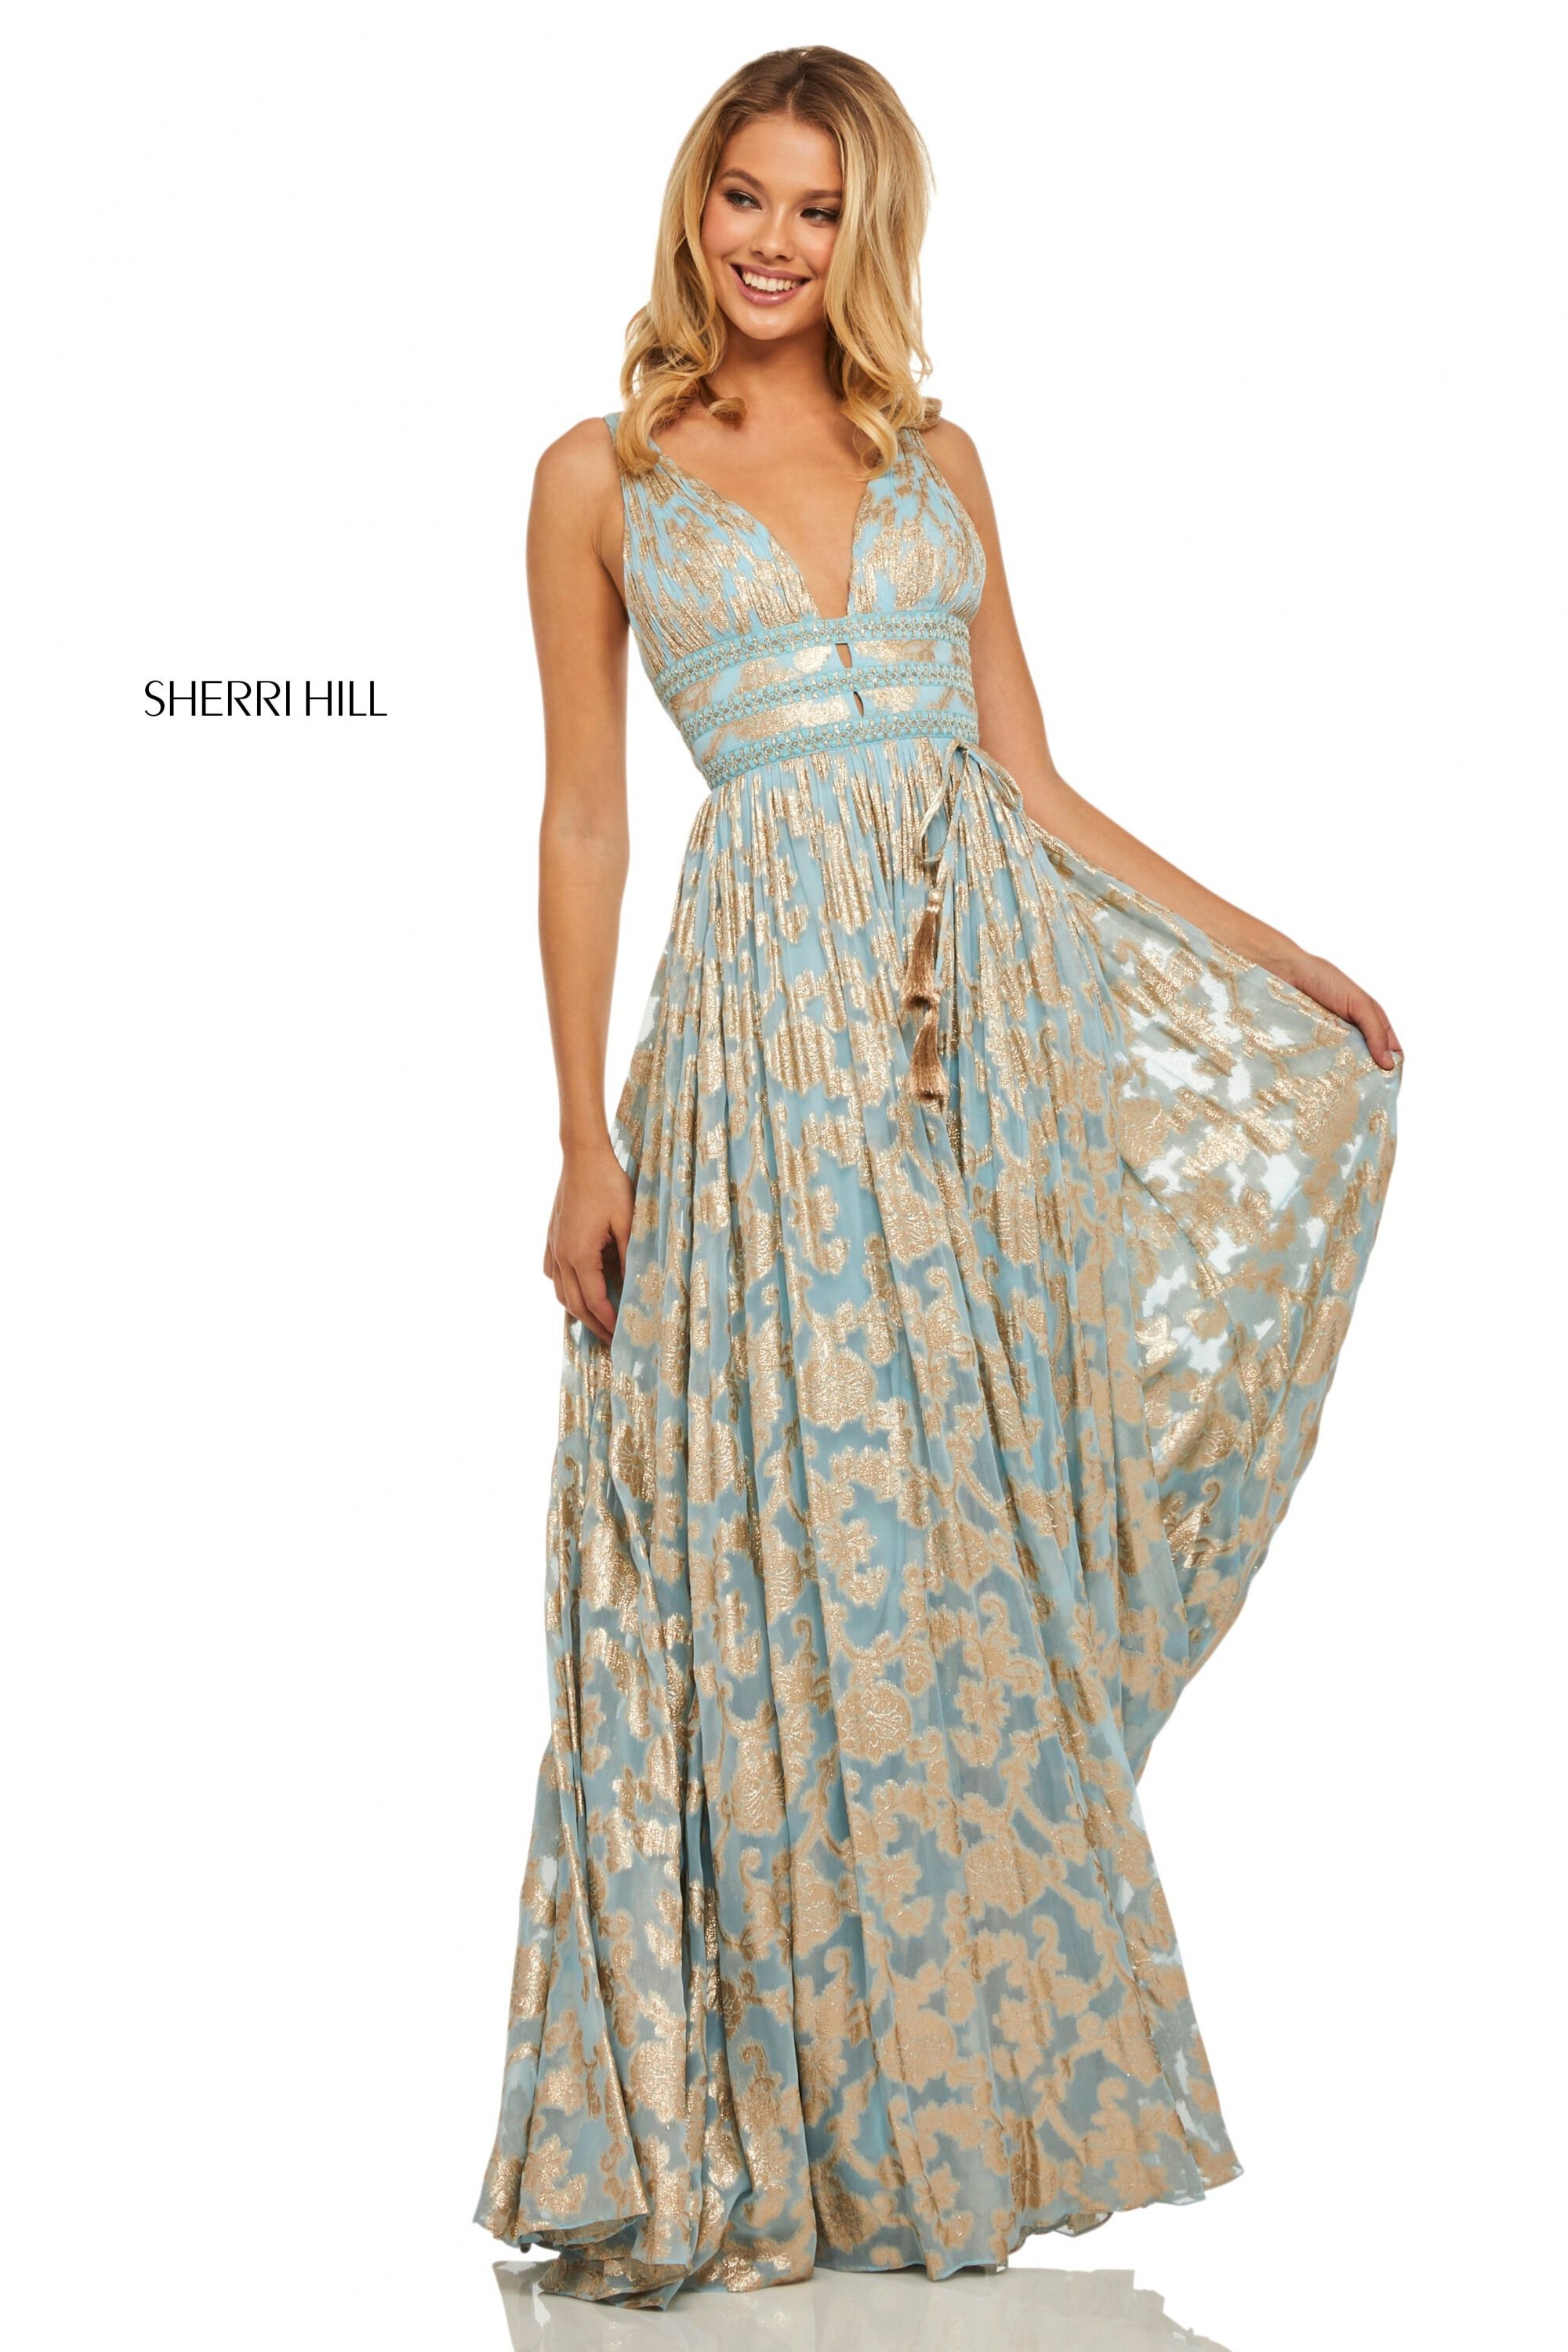 large size dresses to wear to a wedding